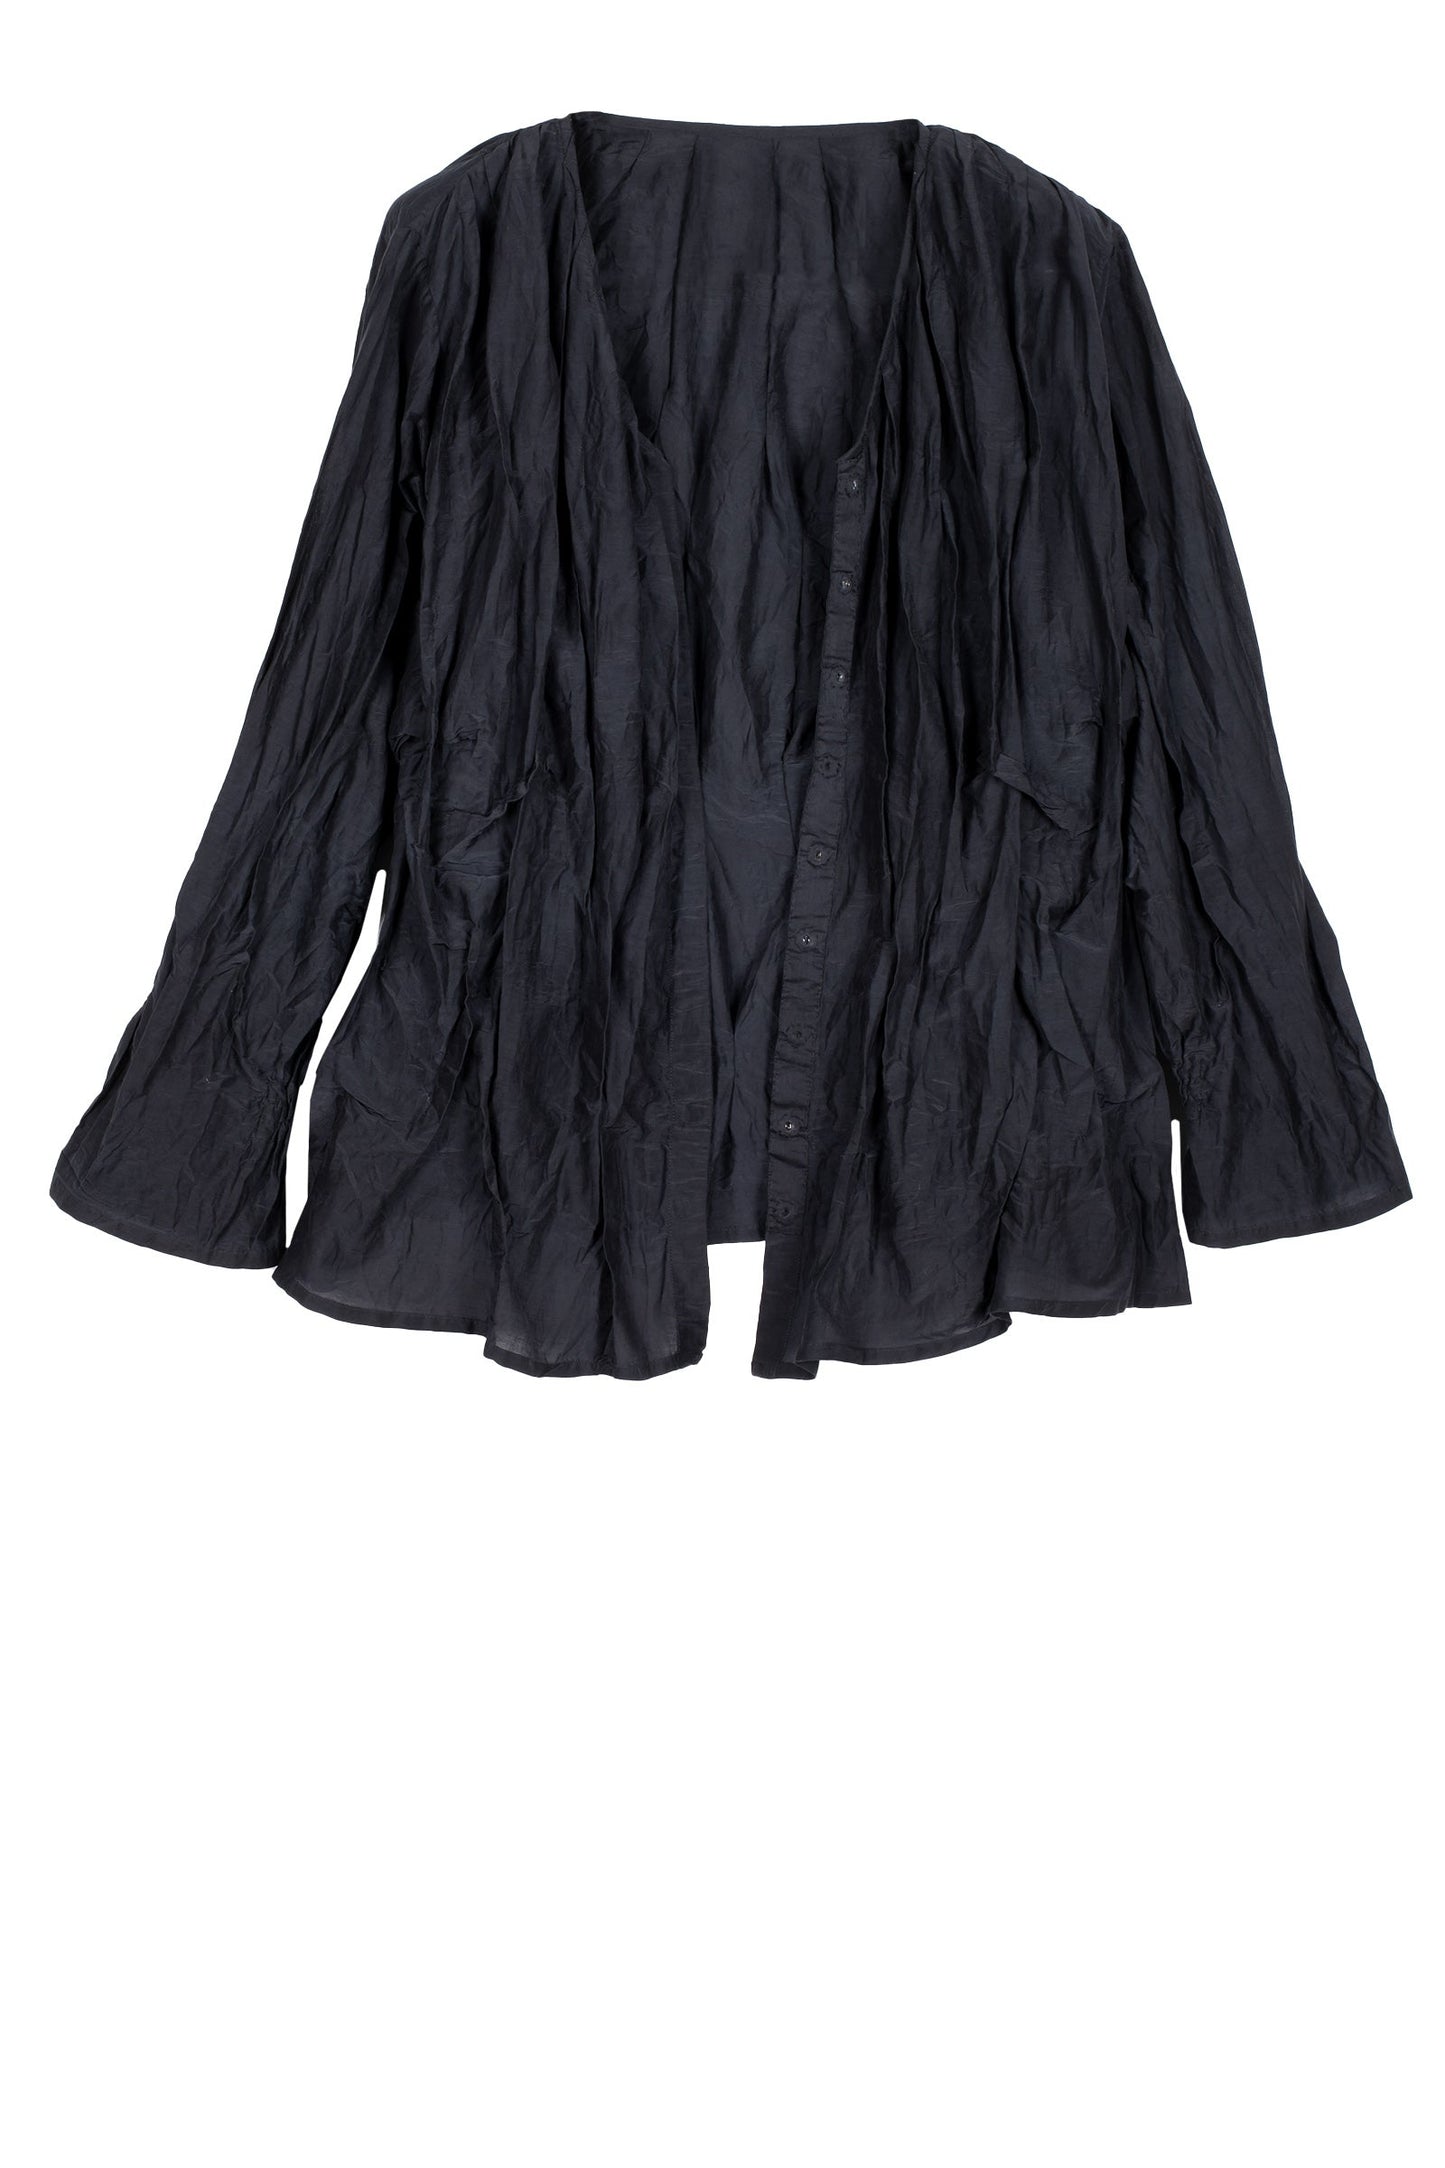 DYED COTTON SILK VOILE WAVY V-NECK TUCKED BLOUSE - dc1542-blk -